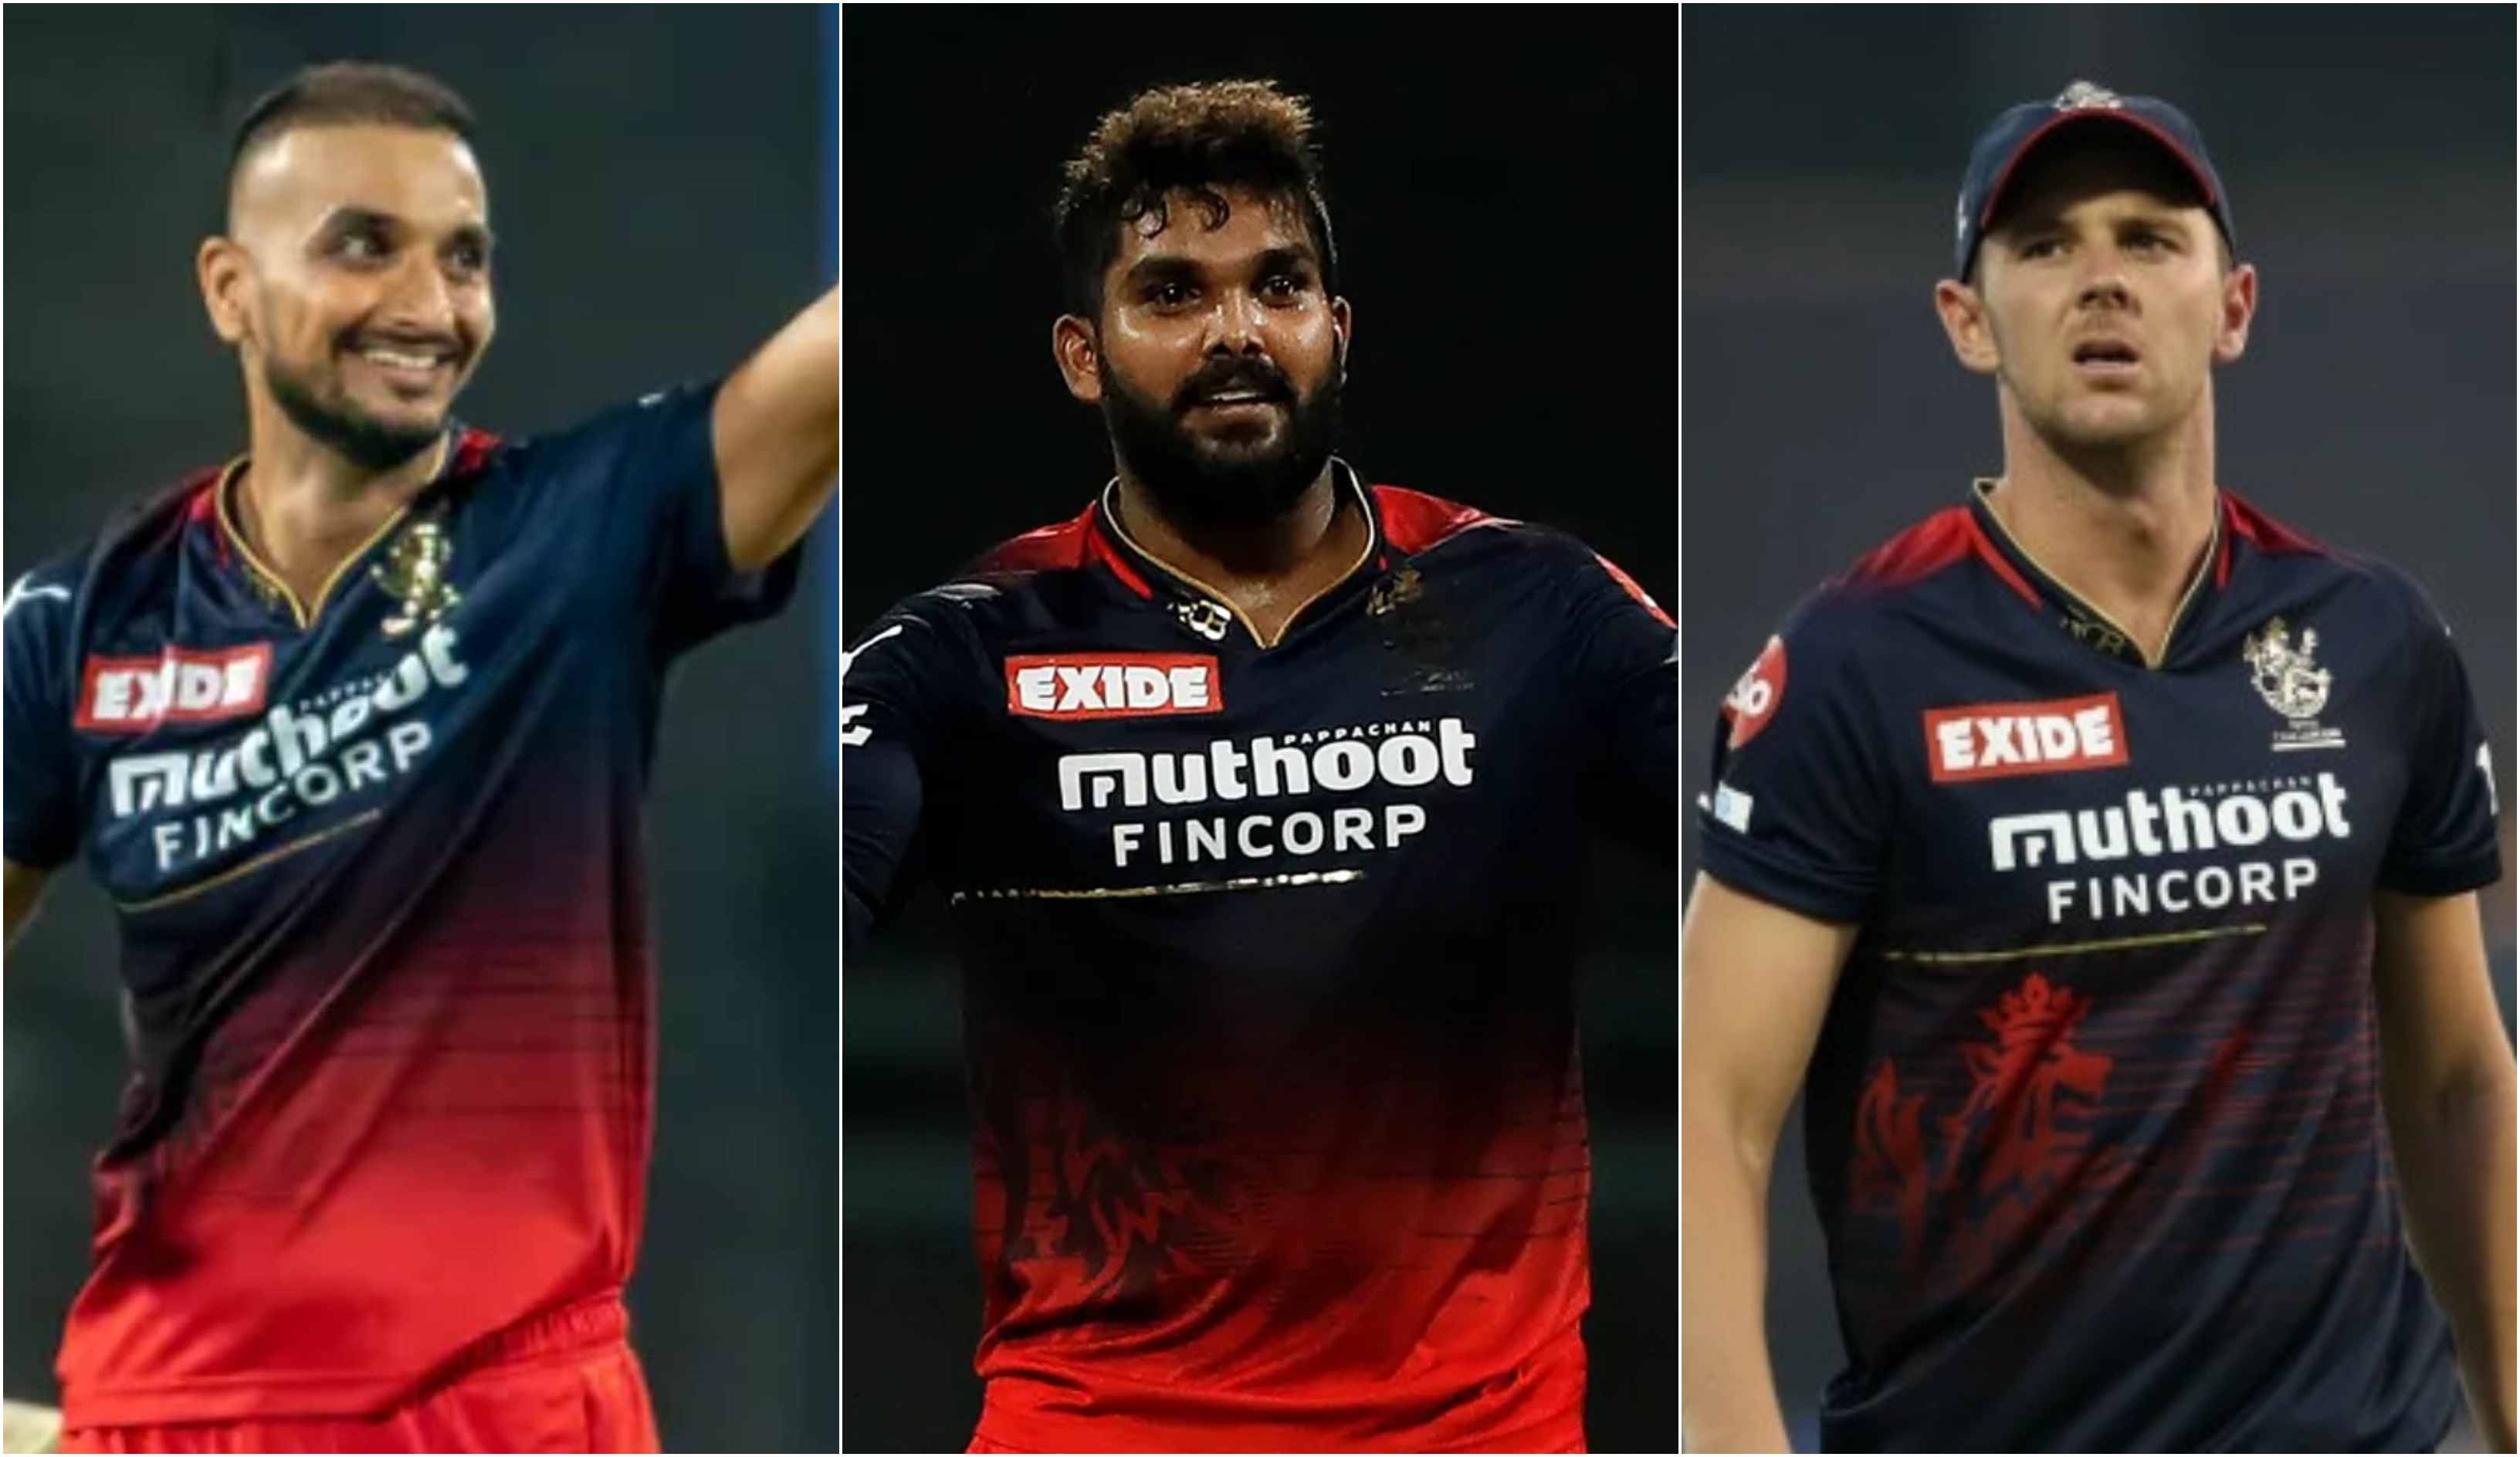 Should RCB bid for Mitchell Stark and Glen Maxwell in the IPL 2021 auction?  - Quora